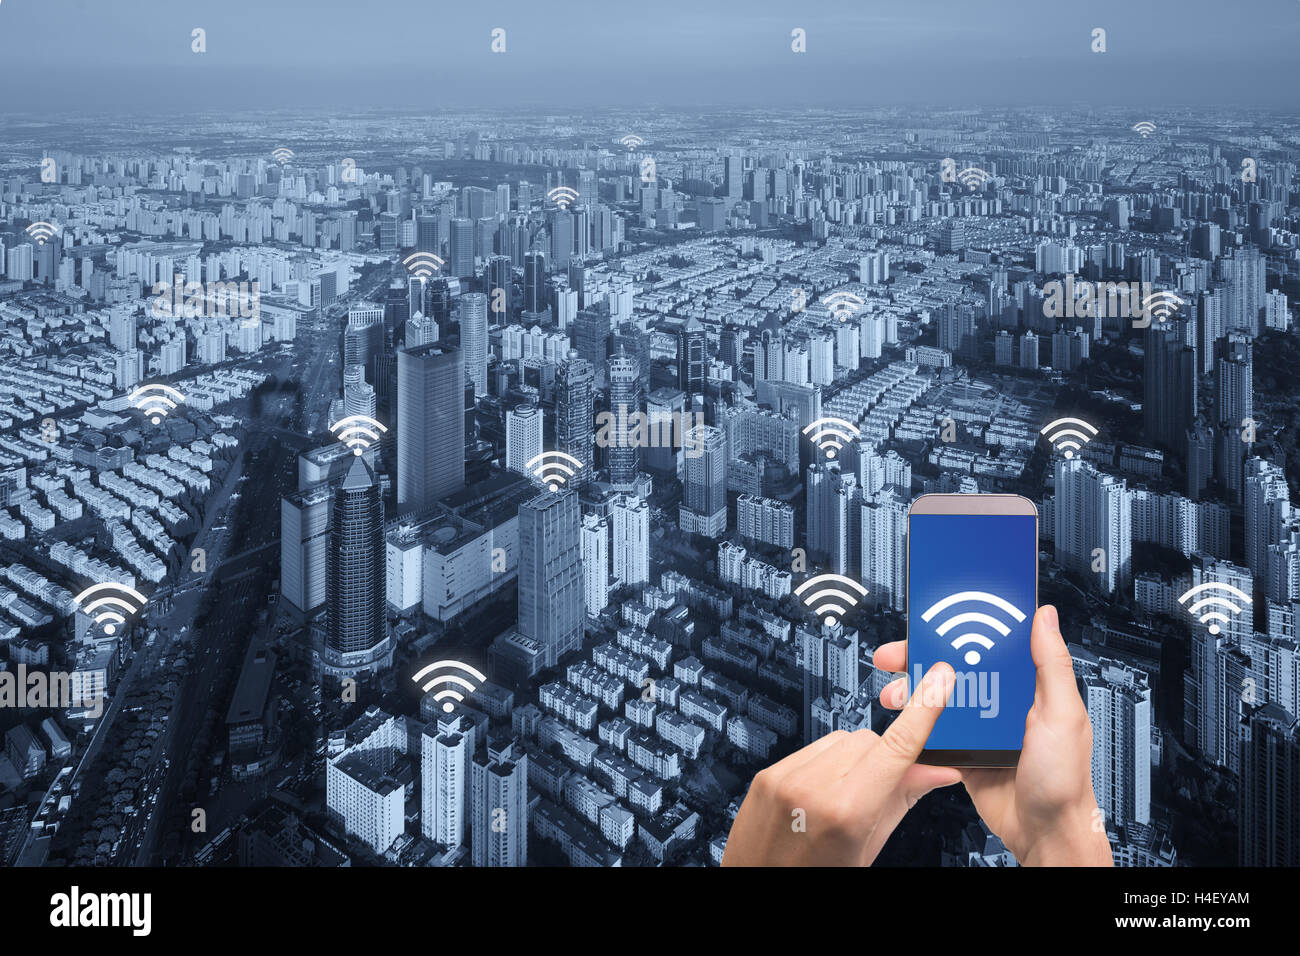 Wifi icon and Paris city with network connection concept, Shanghai smart city and wireless communication network, abstract image Stock Photo